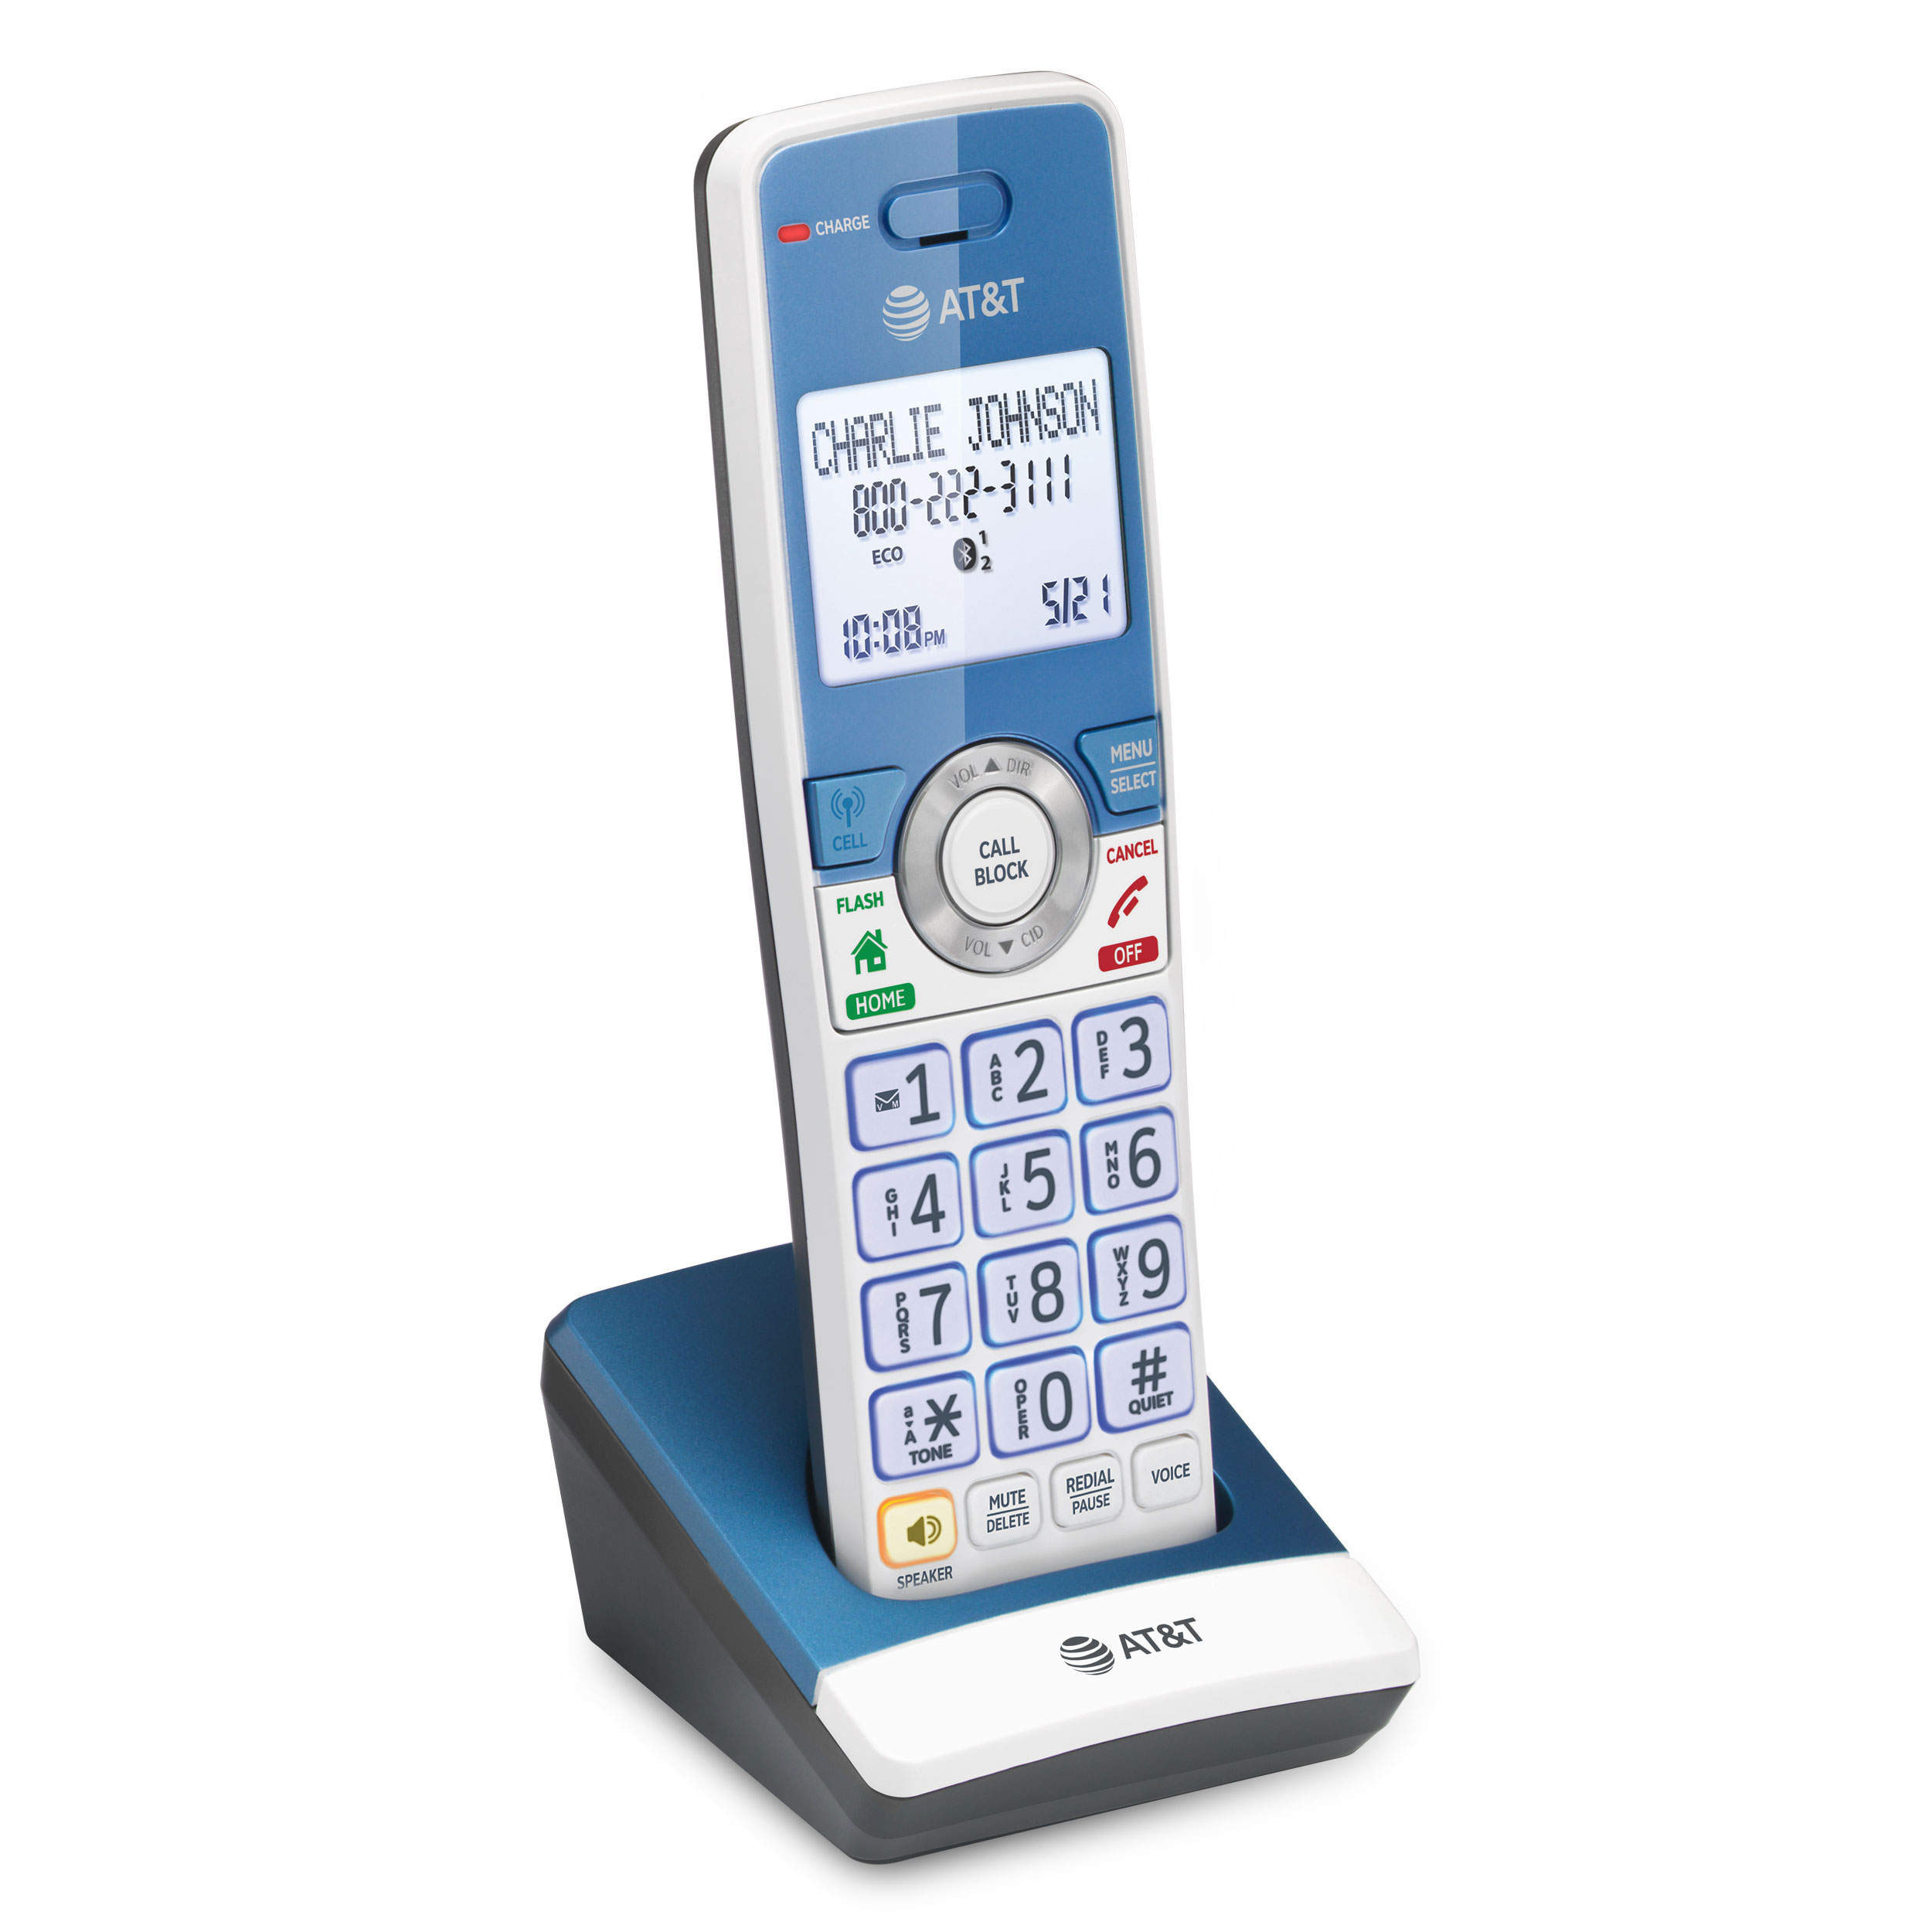 4-Handset Expandable Cordless Phone with Unsurpassed Range, Bluetooth Connect to Cell™, Smart Call Blocker and Answering System - view 8